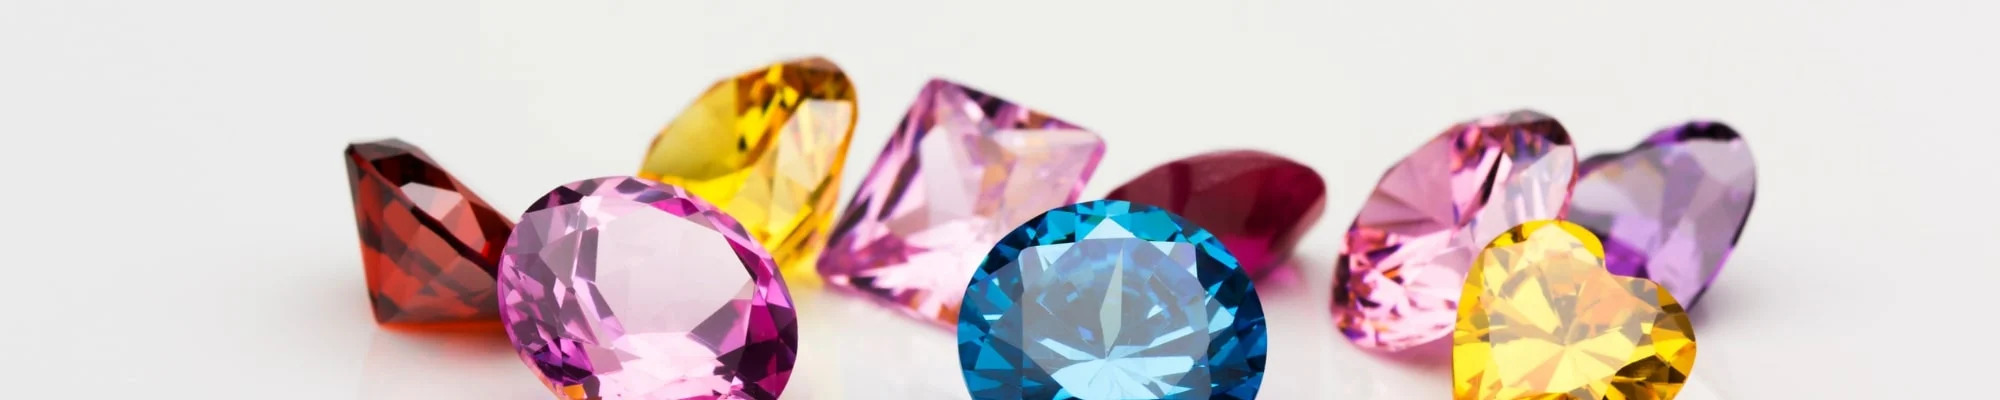 Which birthstone belongs to which month?